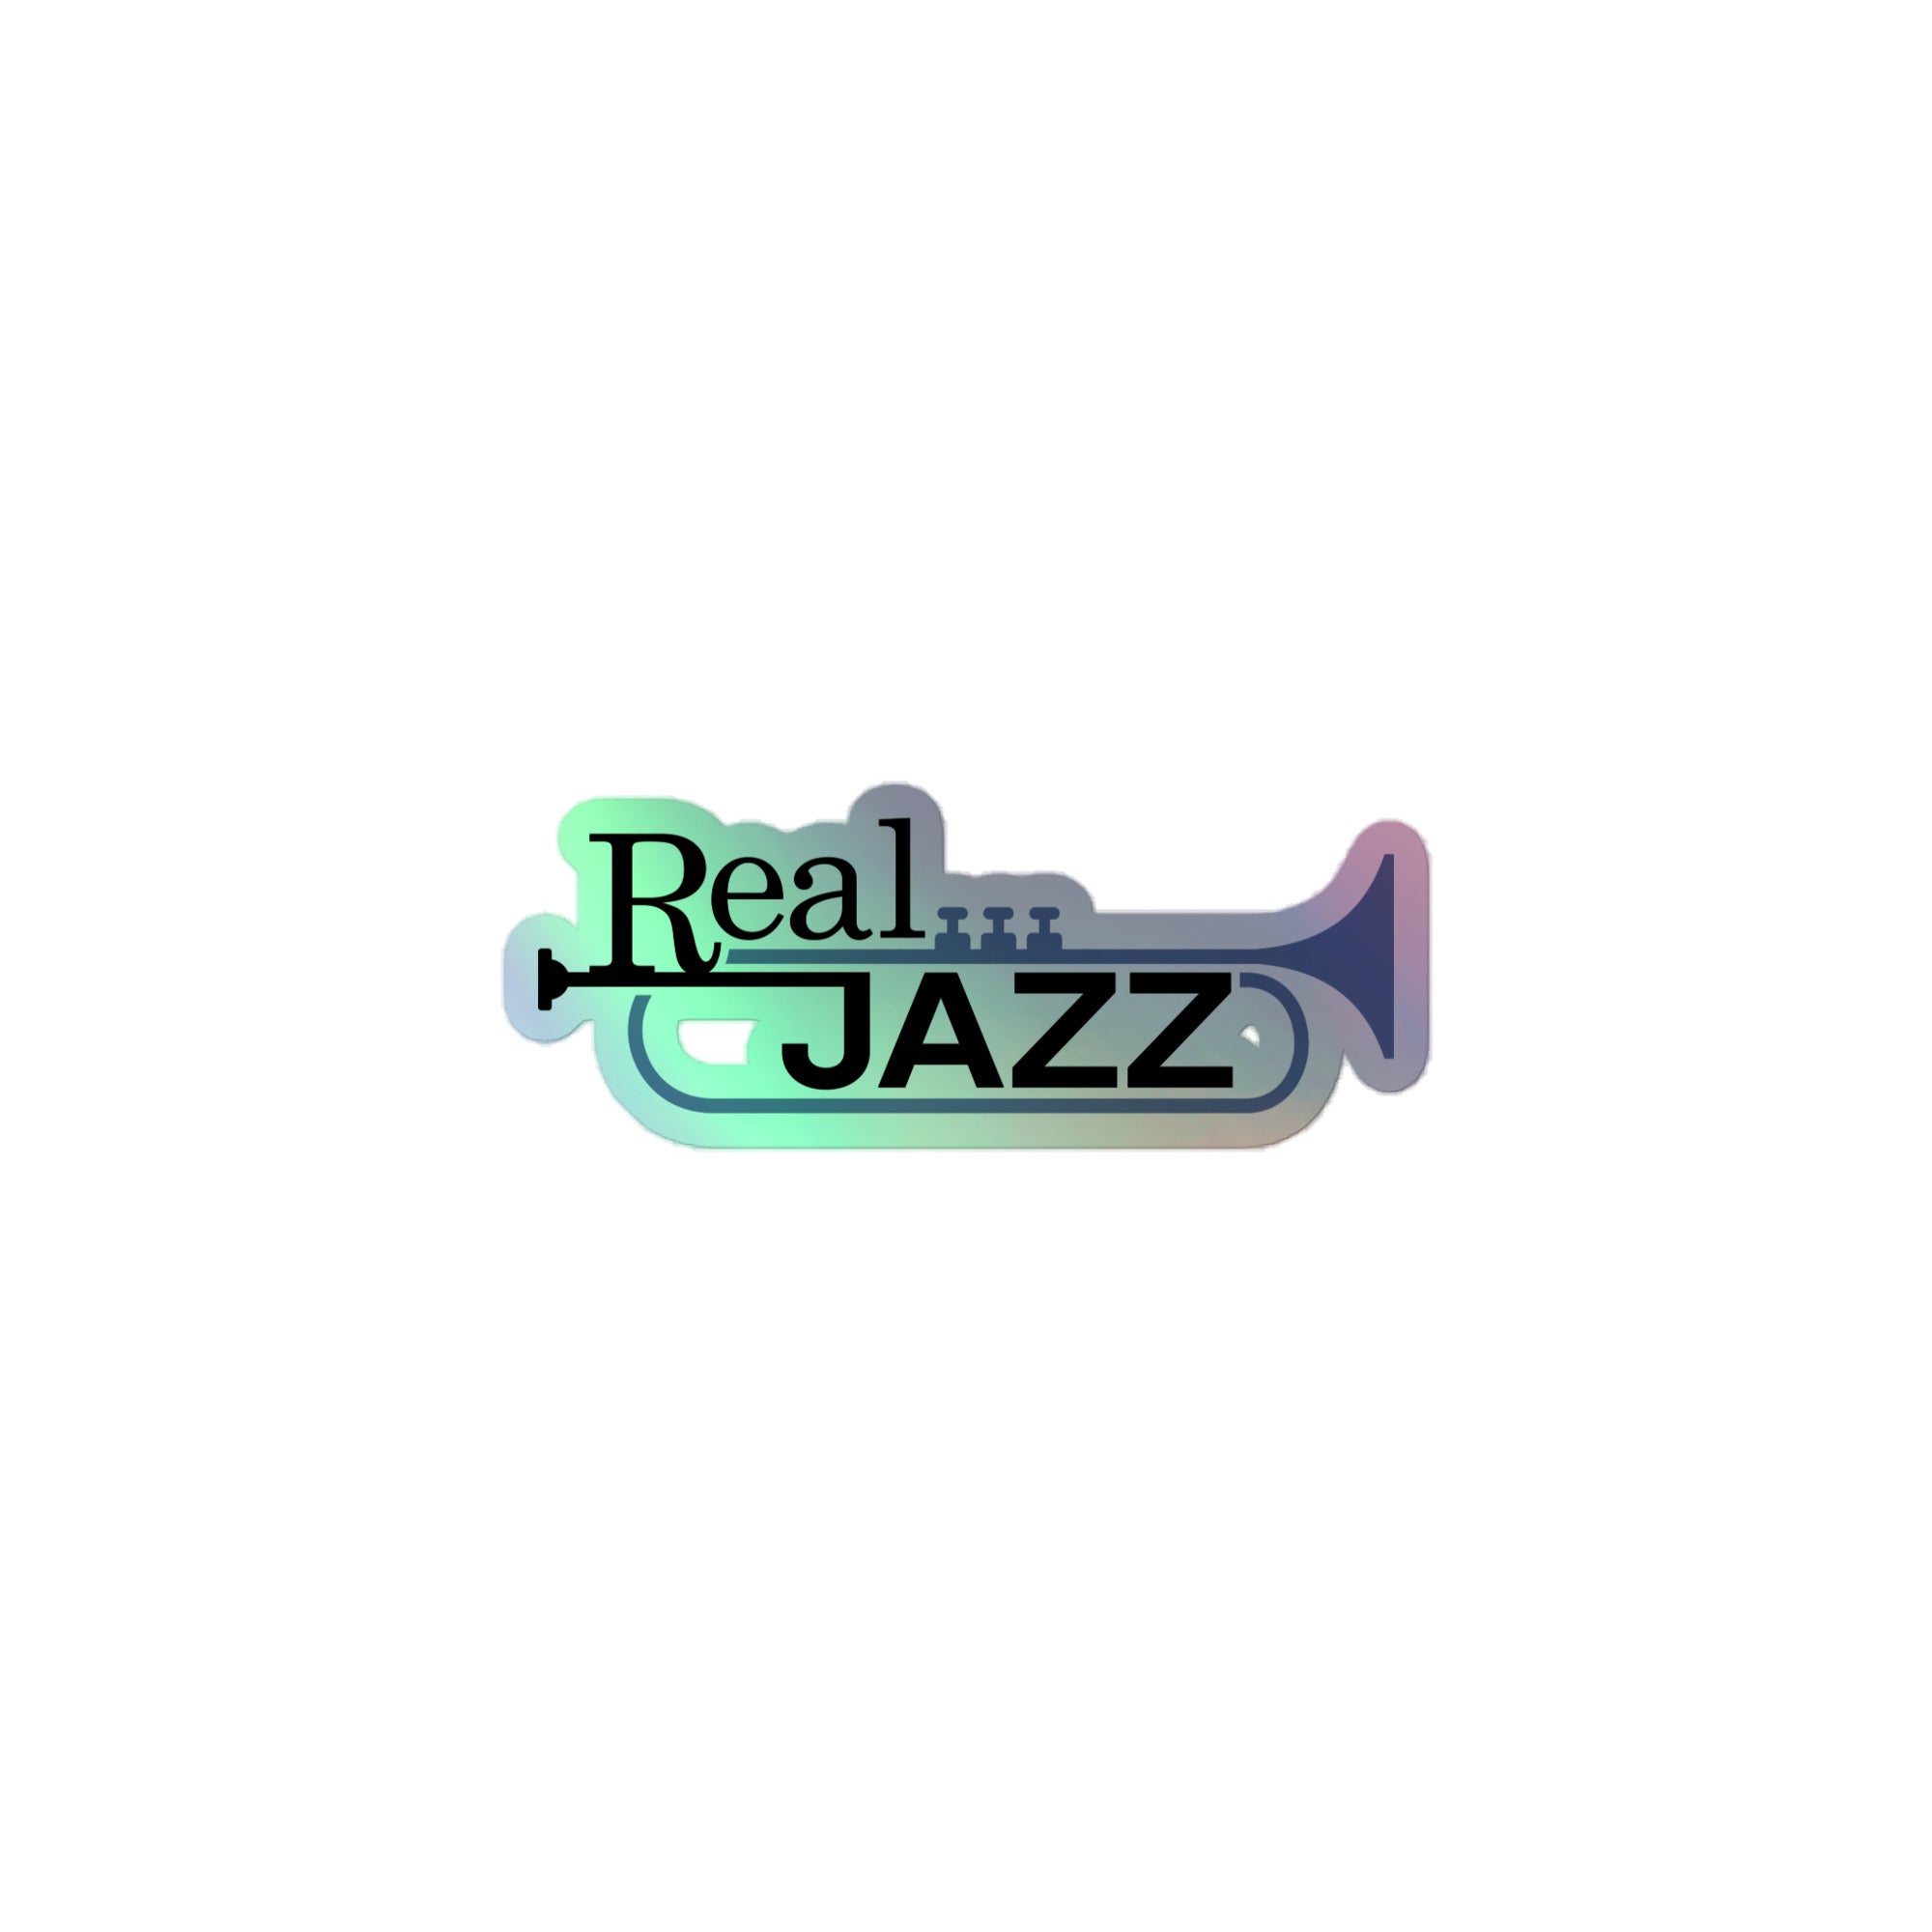 Real Jazz: Holographic Sticker